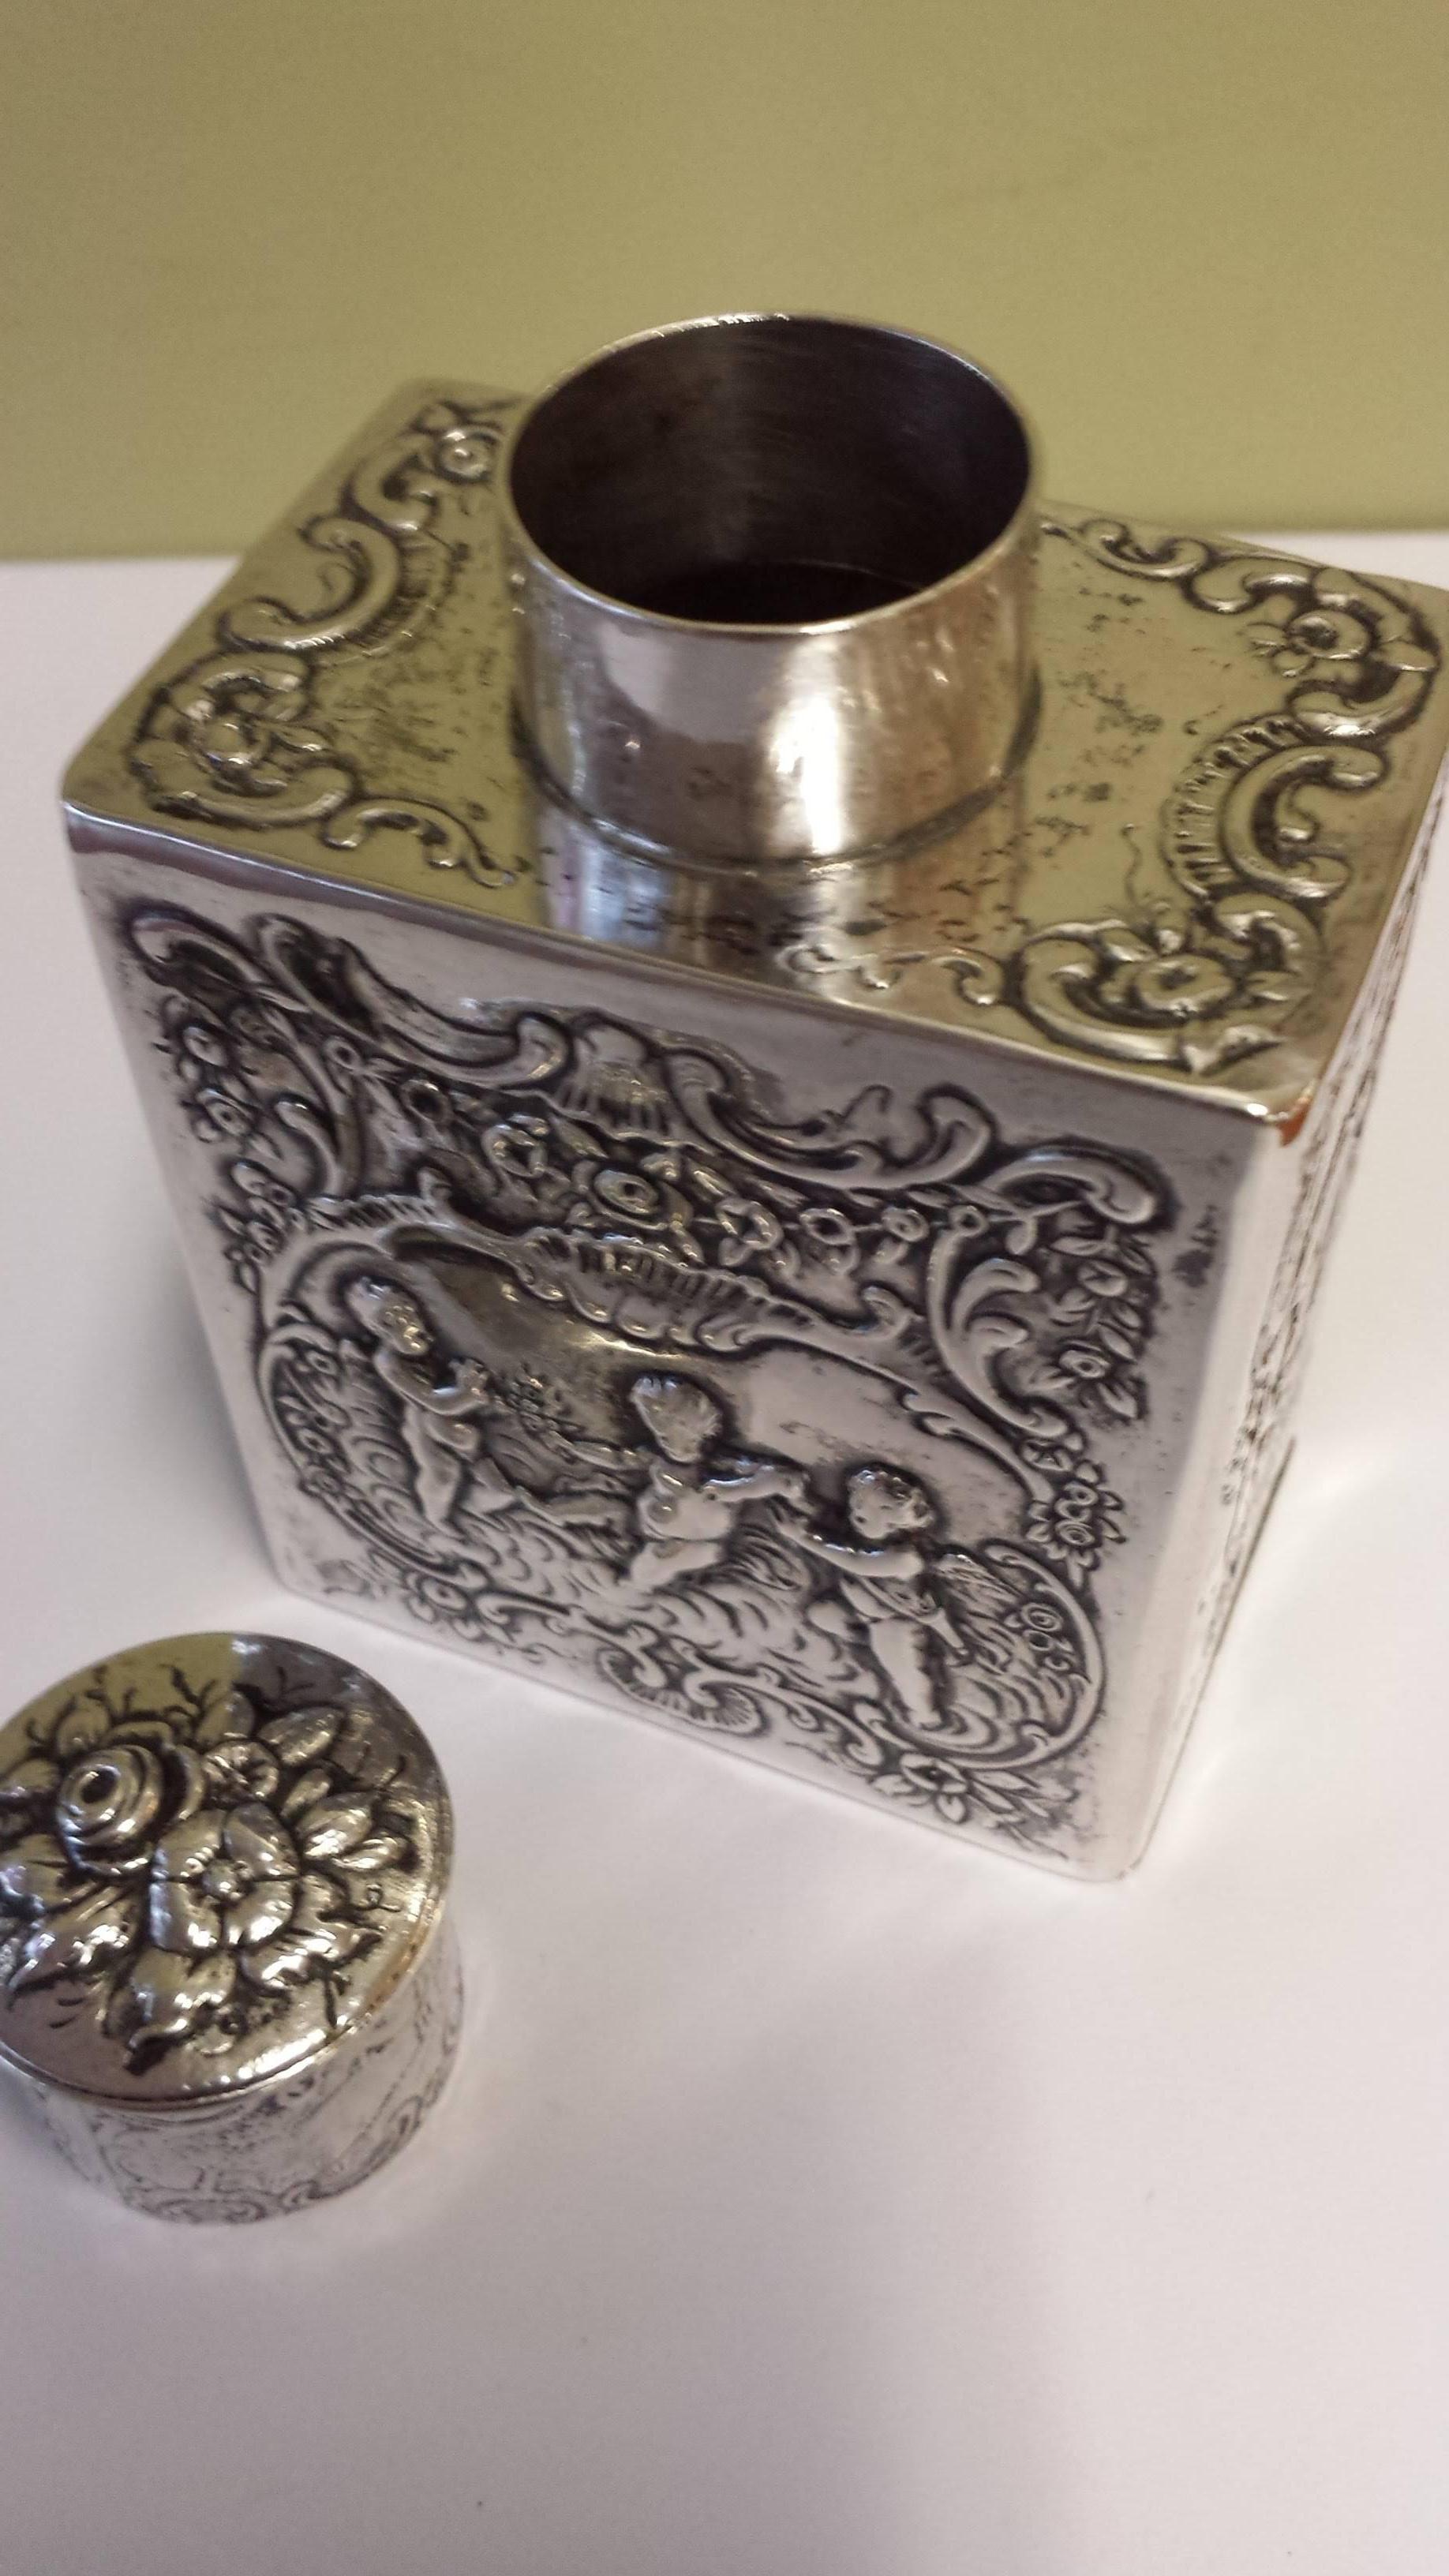 19th Century Swedish Silver Flask or Decanter with Embossed Cherubs & Torch and Heart Design